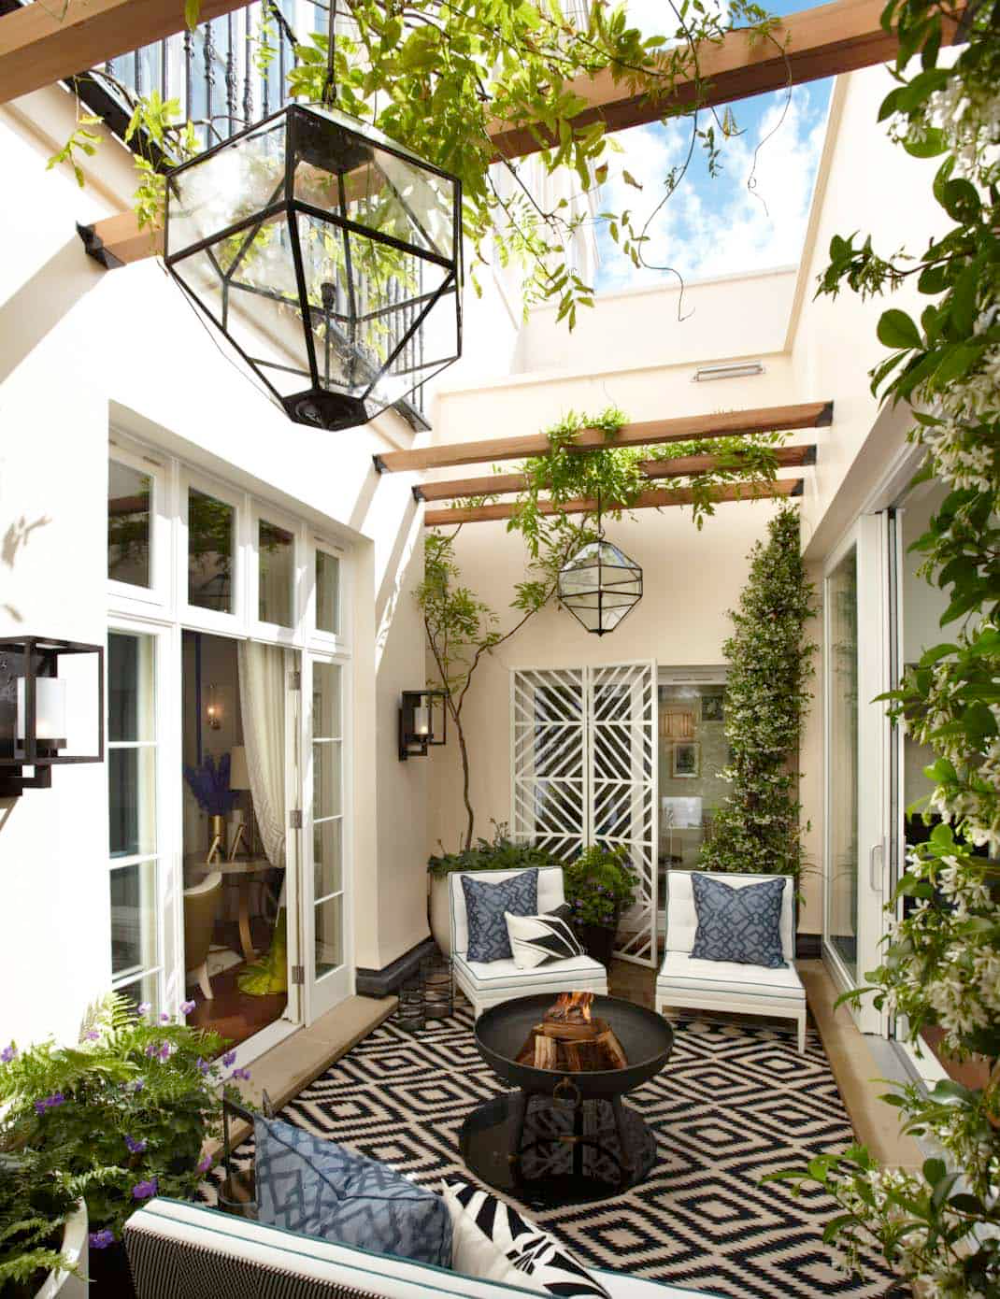 Creative Ways to Maximize Limited Outdoor Space for a Cozy Patio